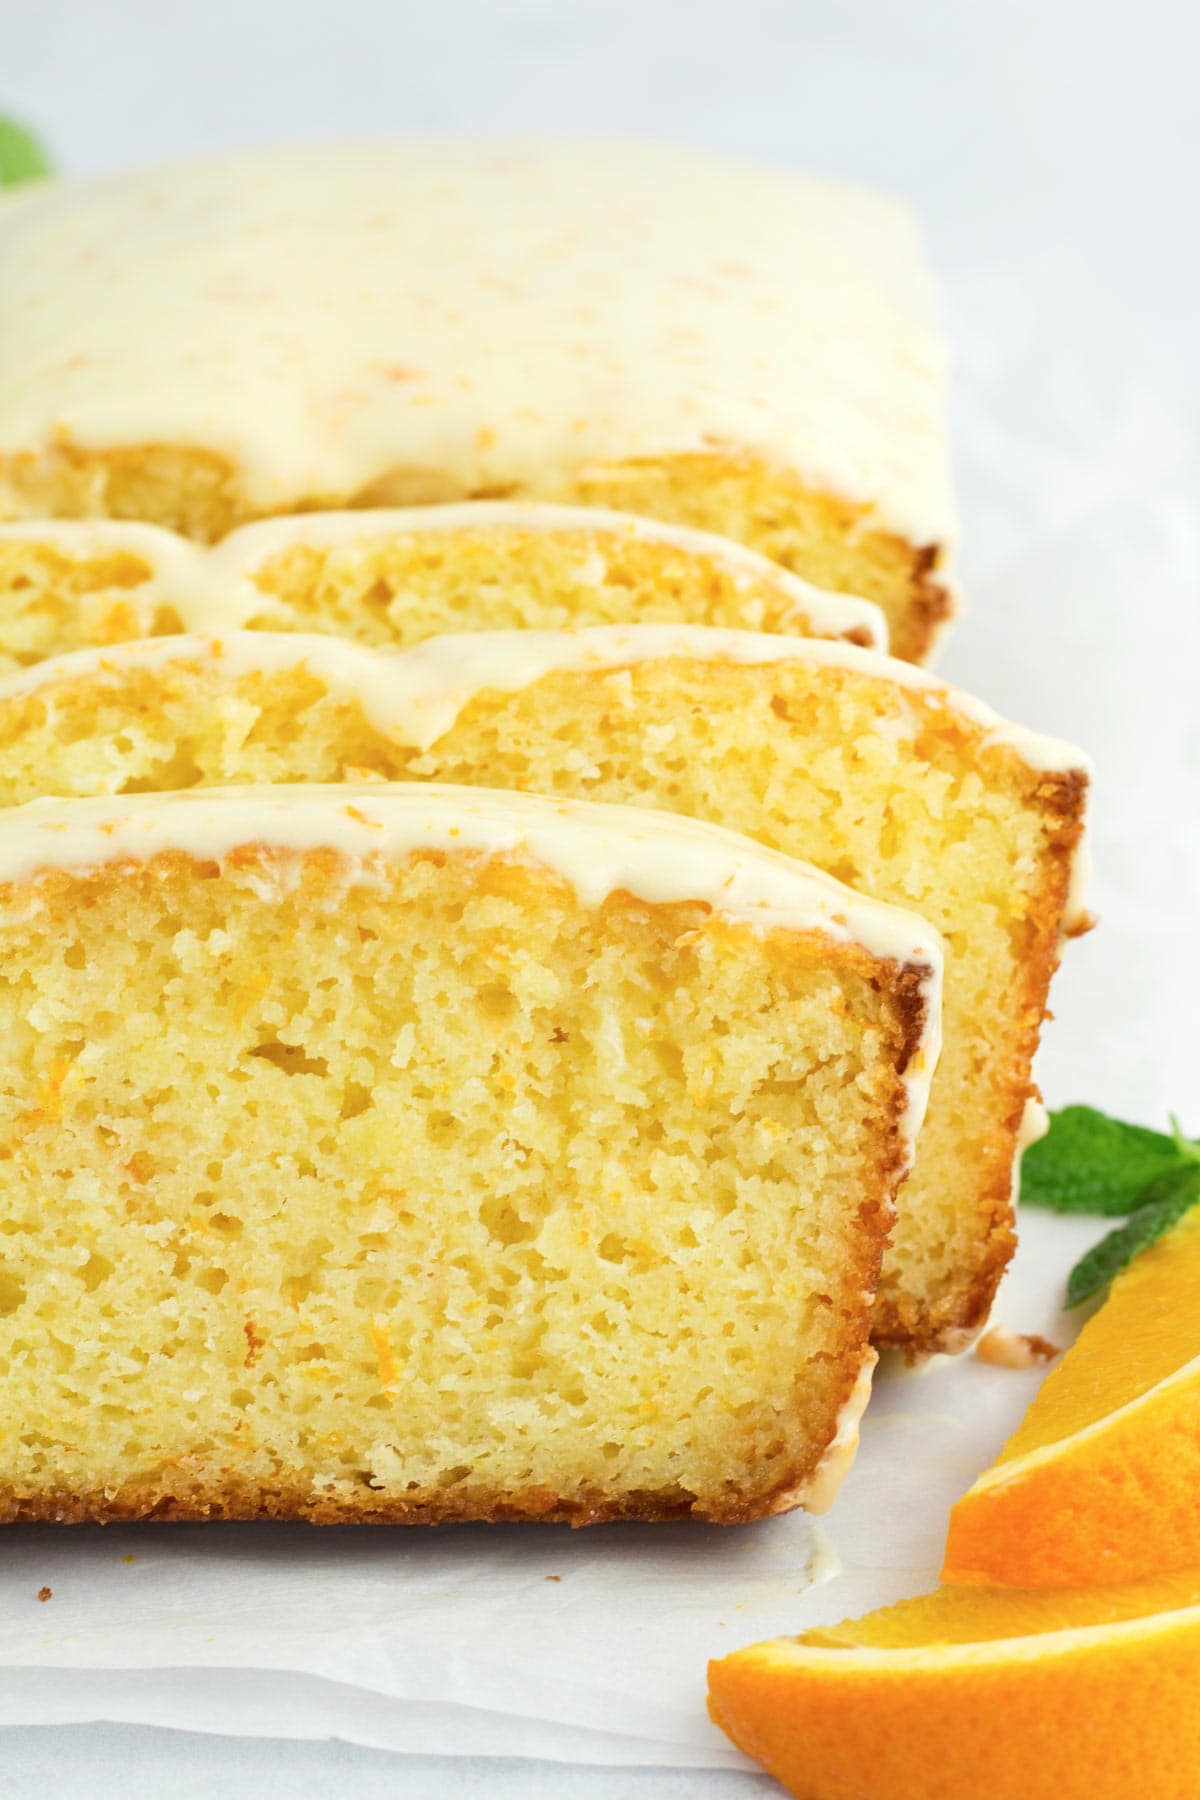 Slices of loaf cake with fresh orange icing on top.